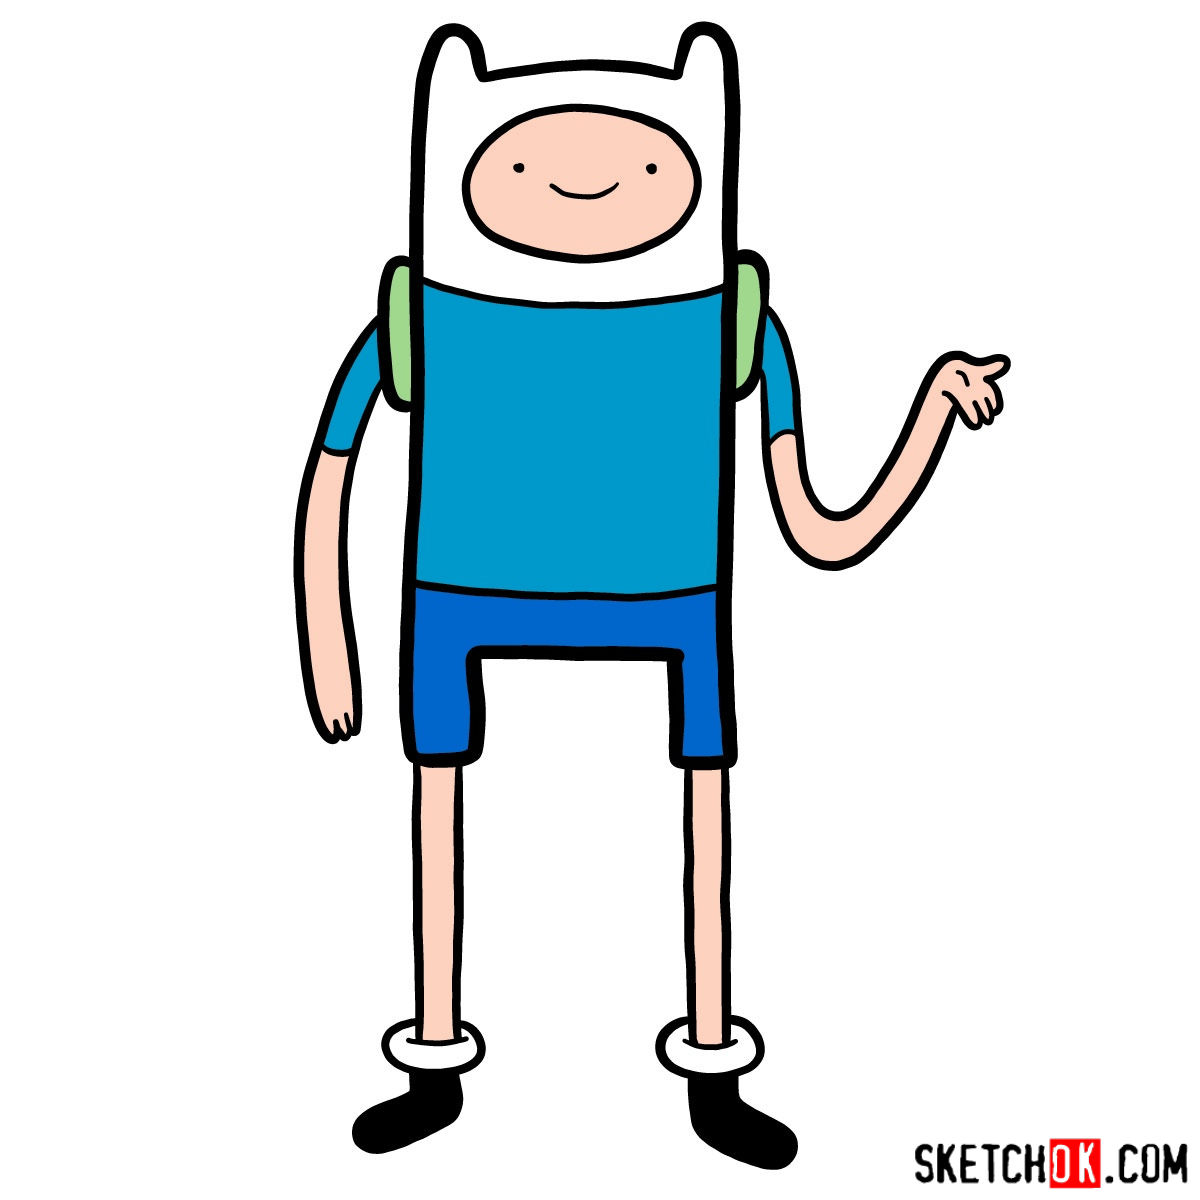 How to draw Finn from Adventure Time